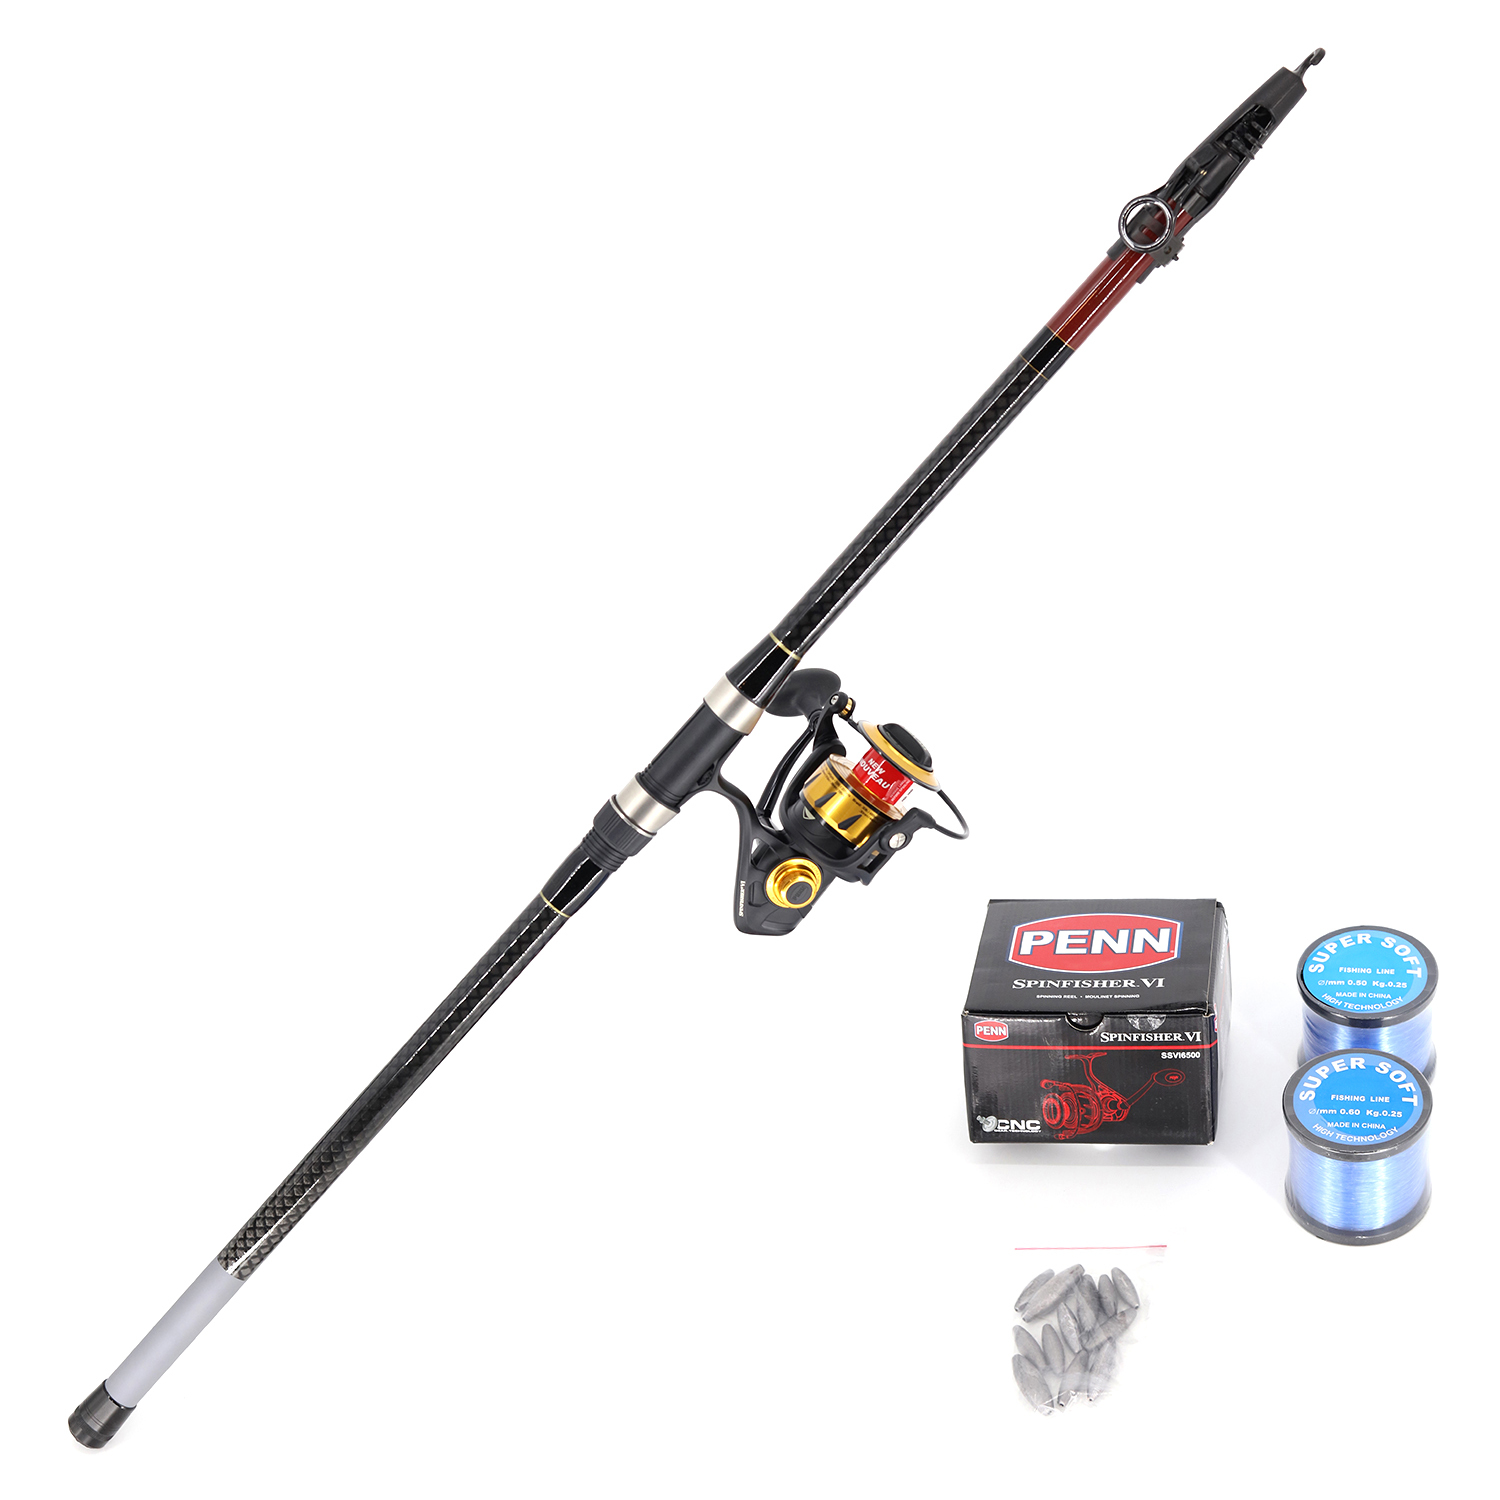 Shore Fishing (Pilot 3.9m and Penn VI 6500 including Nylon line with rigs  and sinkers and snap swivels) Combo